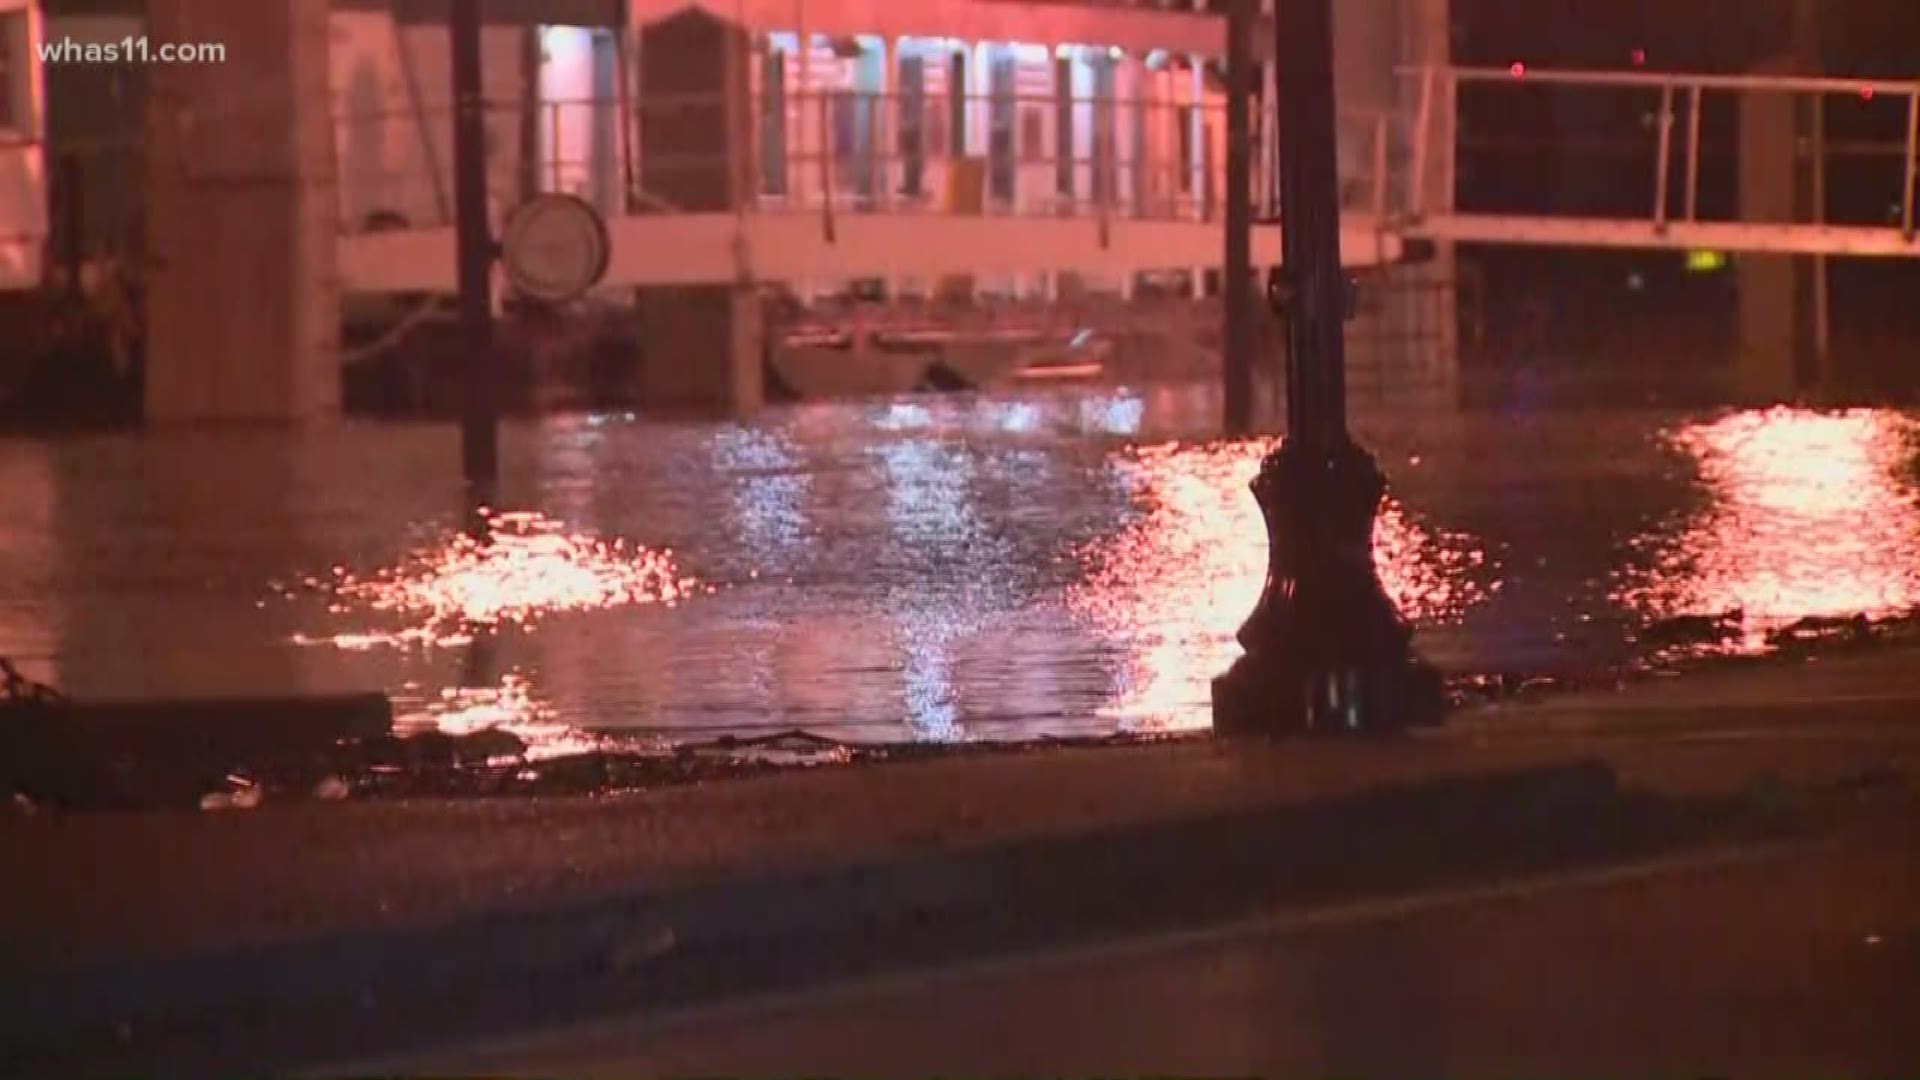 A section of River Road between 4th and 7th Street has been shut down due to river flooding.